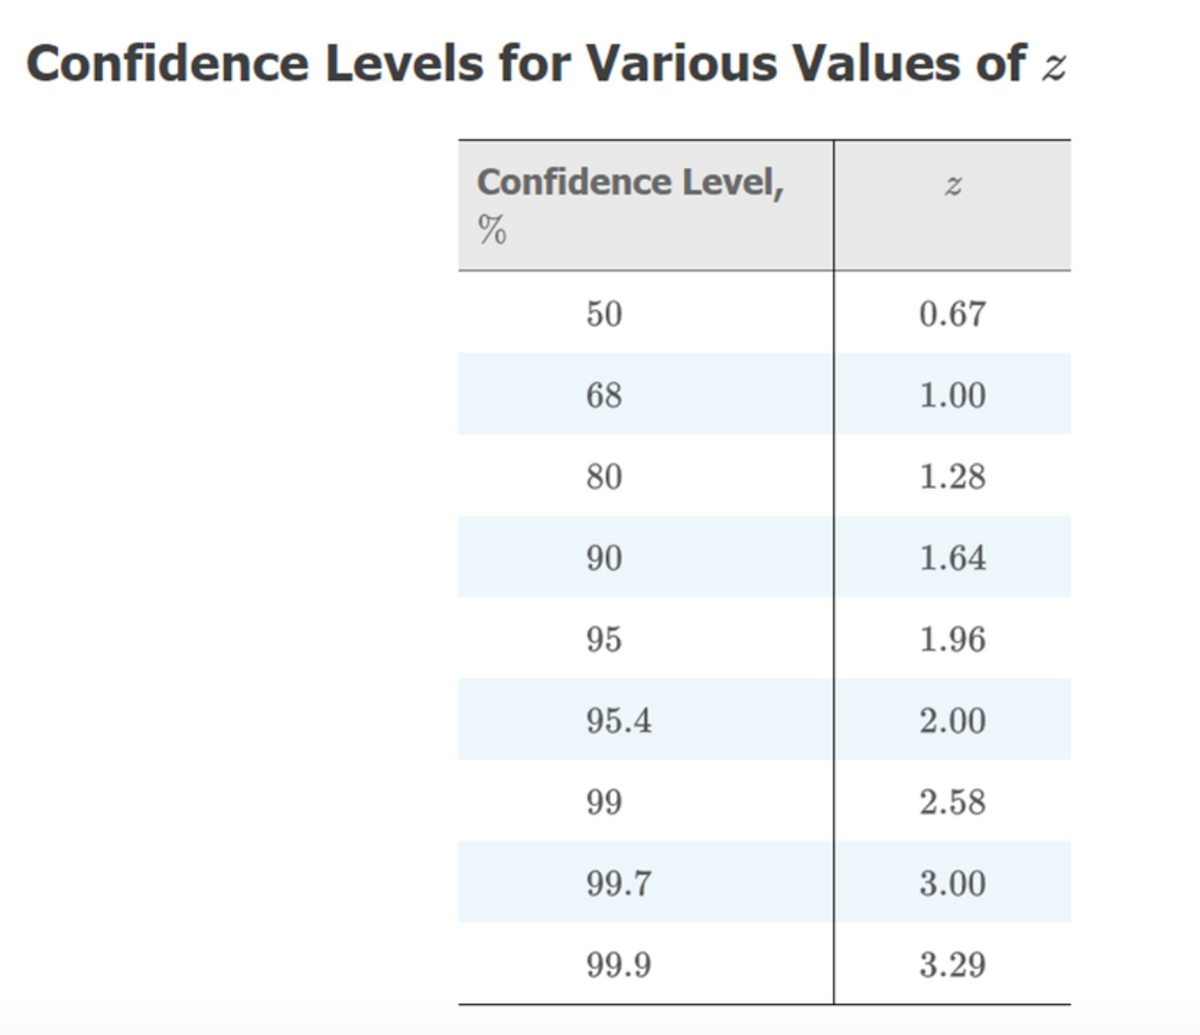 Confidence Levels for Various Values of z
Confidence Level,
%
50
68
80
90
95
95.4
99
99.7
99.9
Z
0.67
1.00
1.28
1.64
1.96
2.00
2.58
3.00
3.29